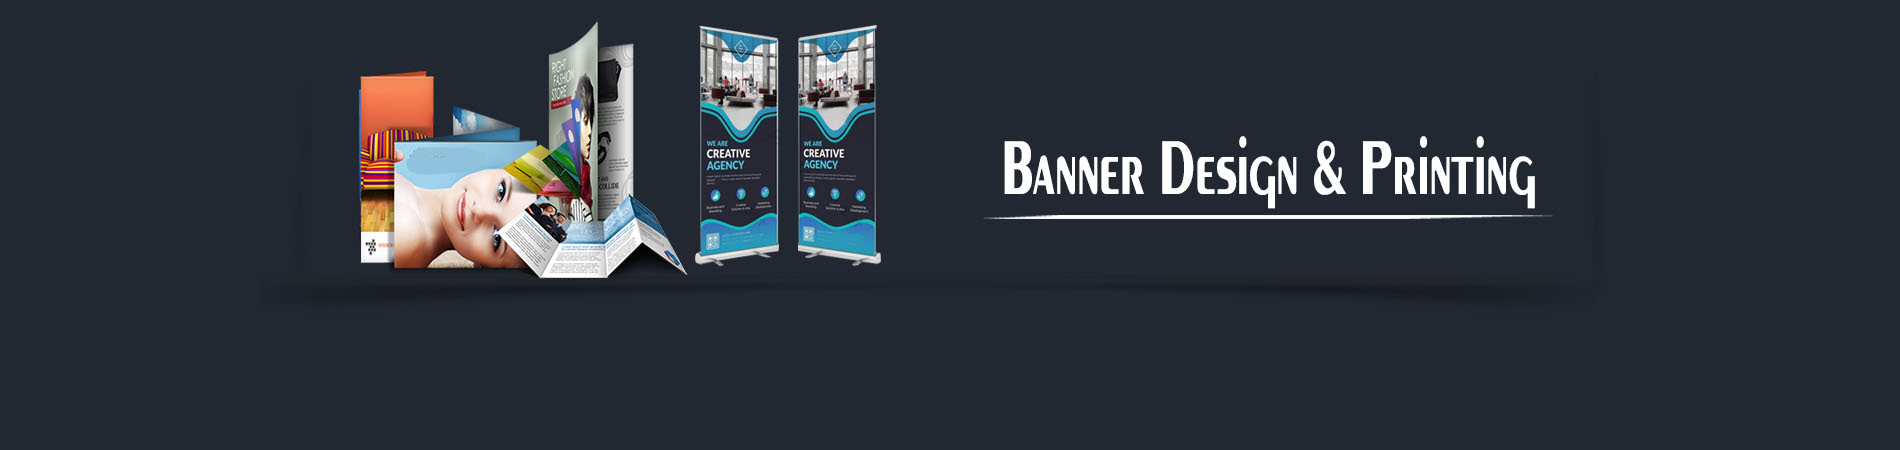 Banner Design & Printing in India